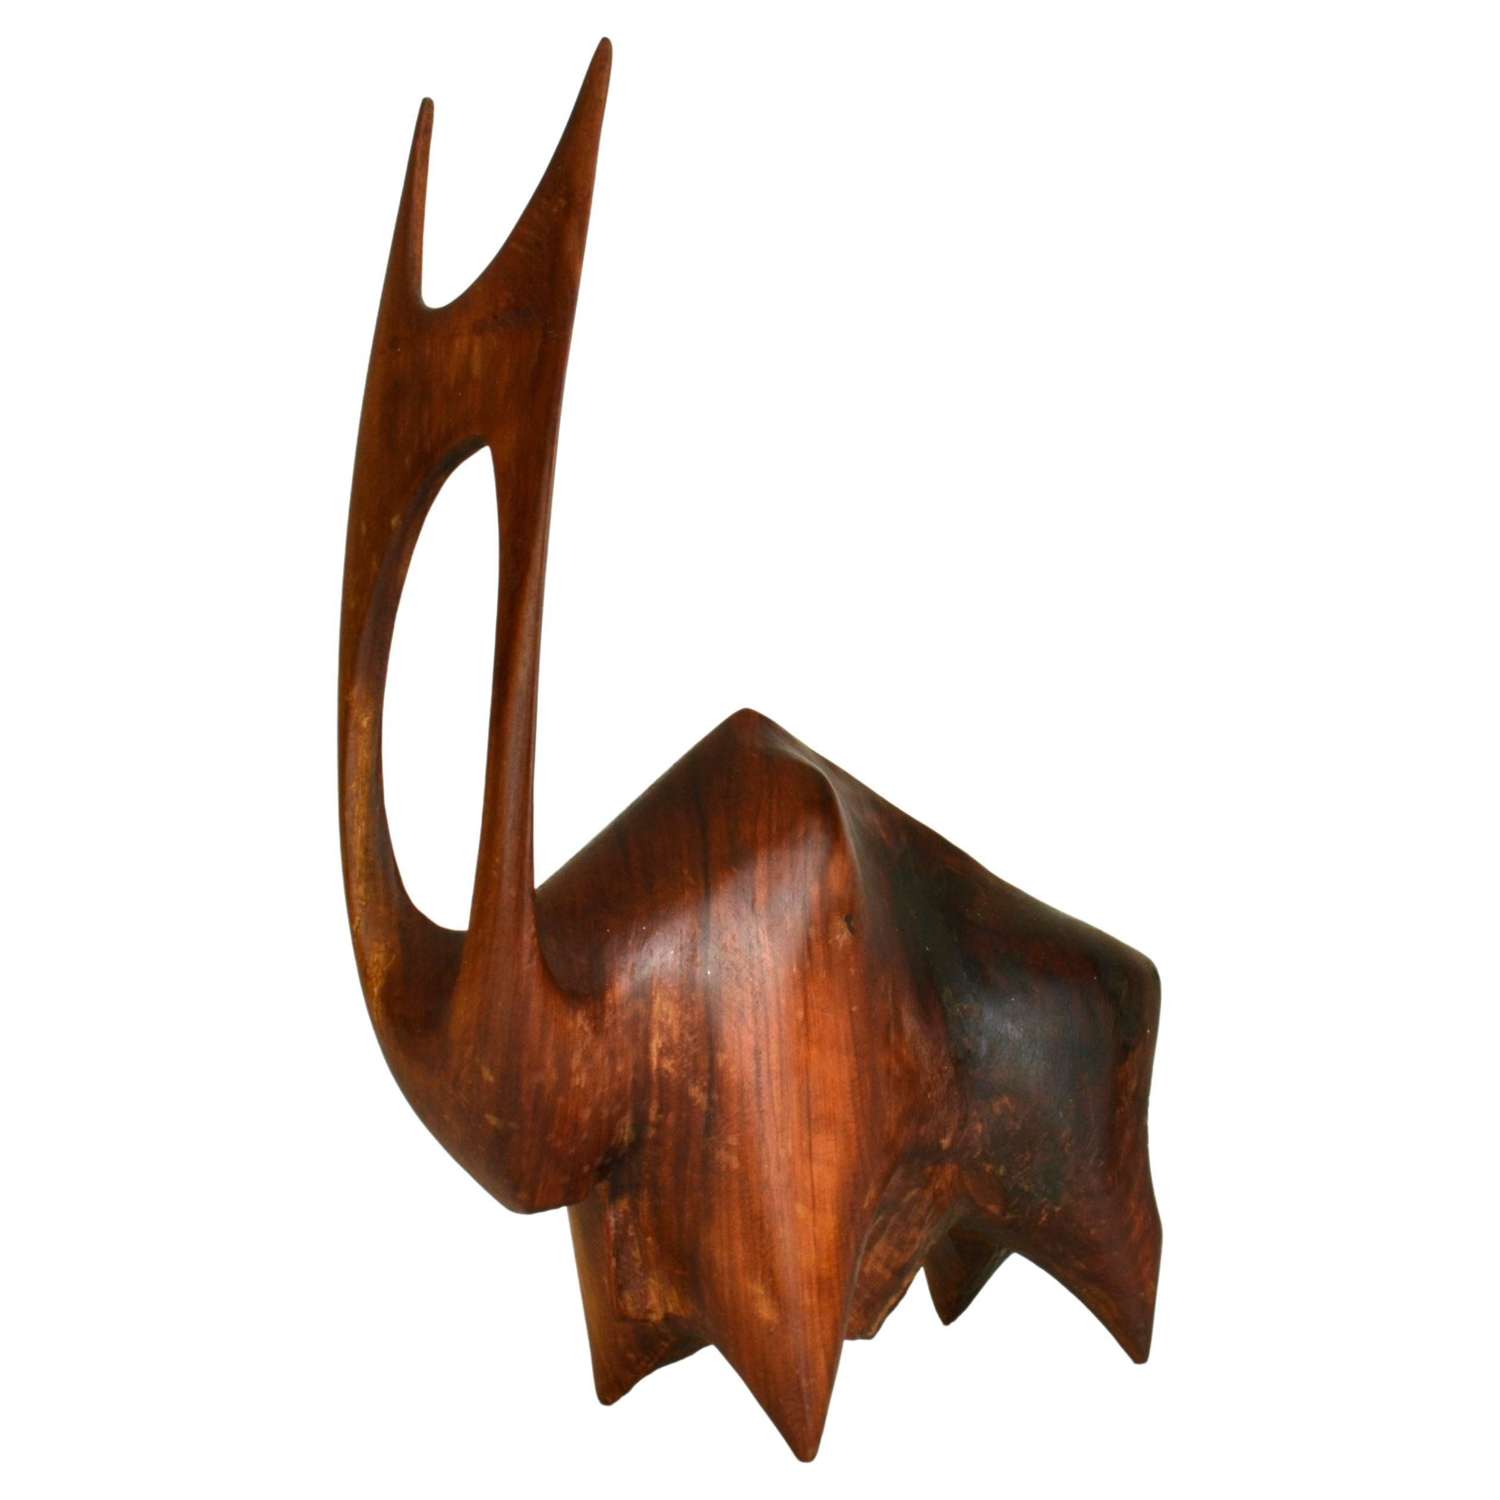 Sculpture of Buffalo or Bull Carved in Hardwood